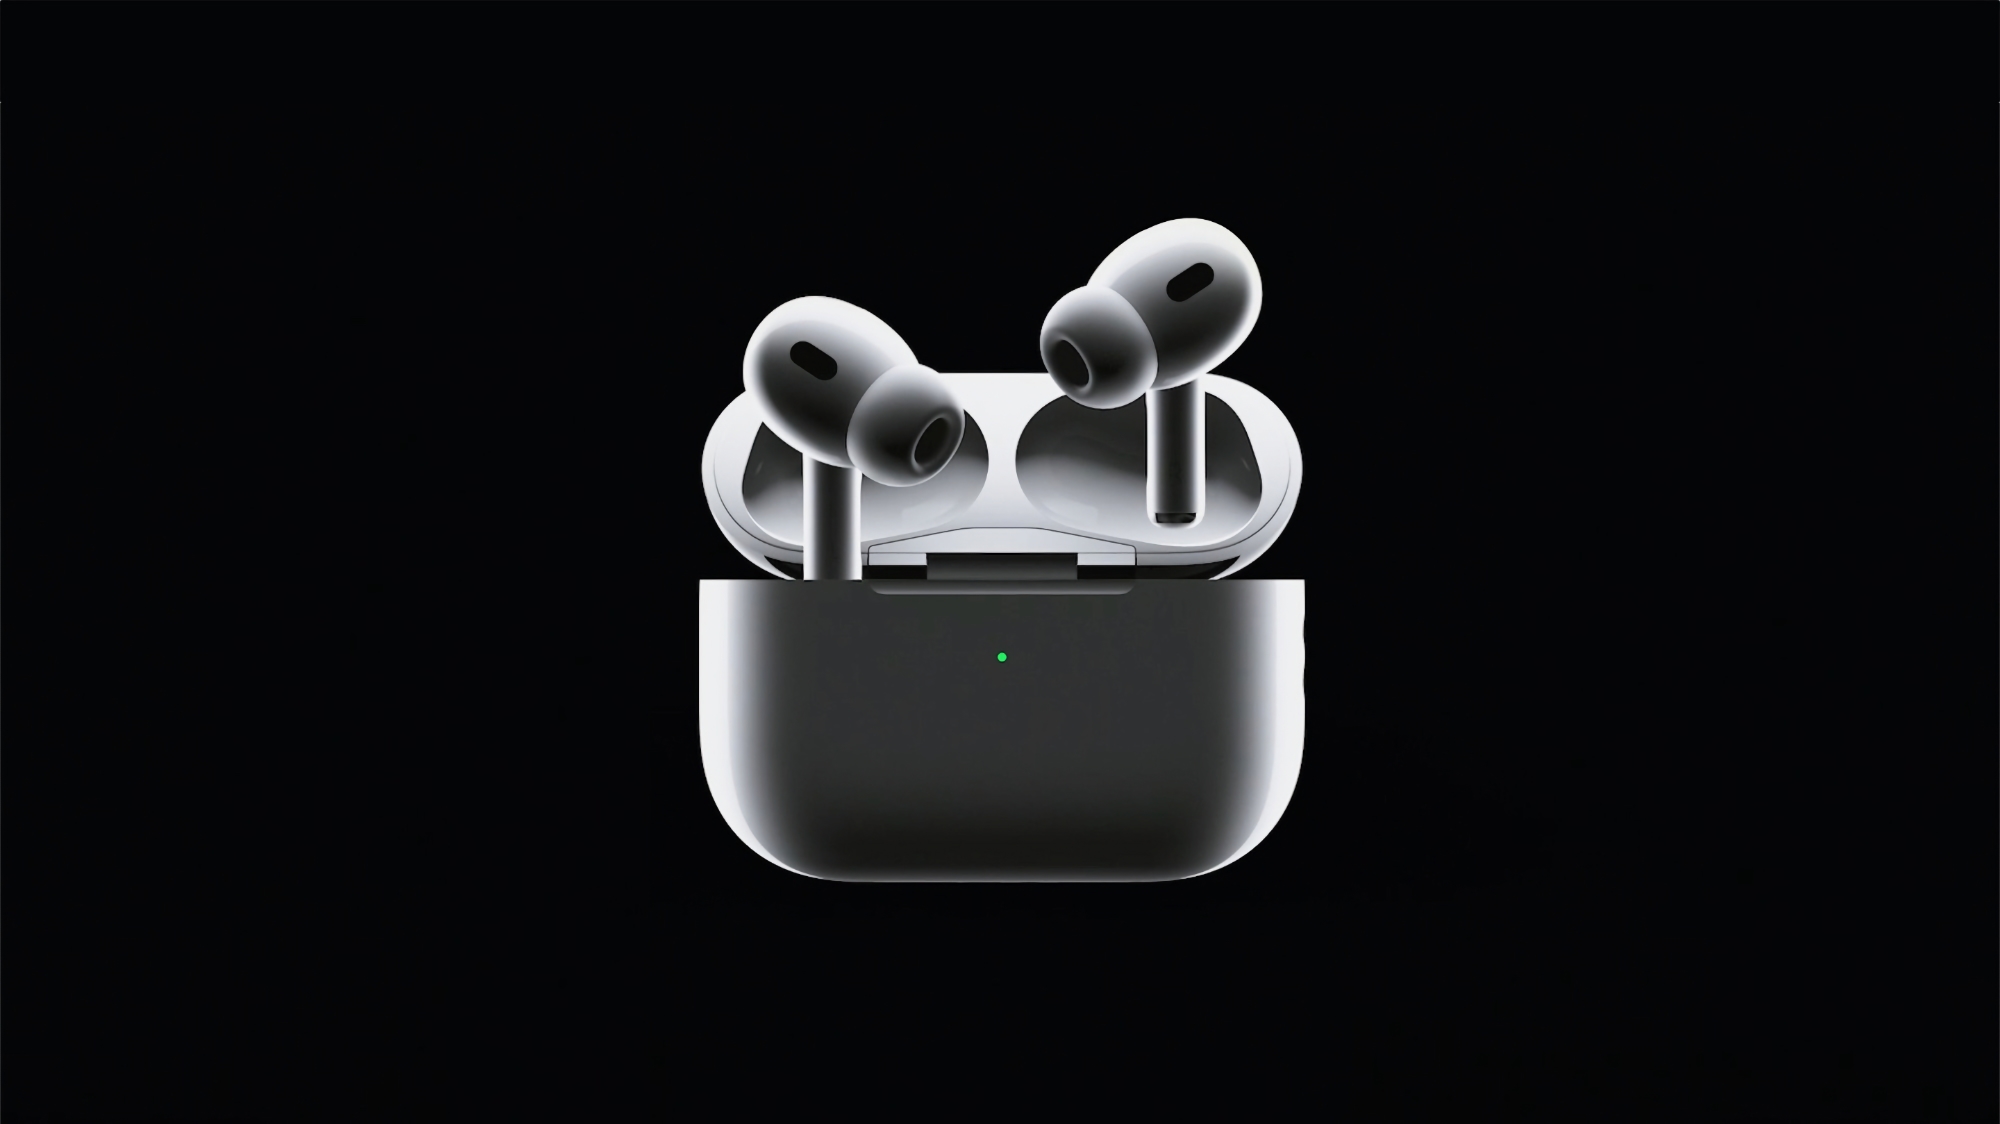 AirPods Pro 2 is back on sale on Amazon for the same price as the Black Friday sale